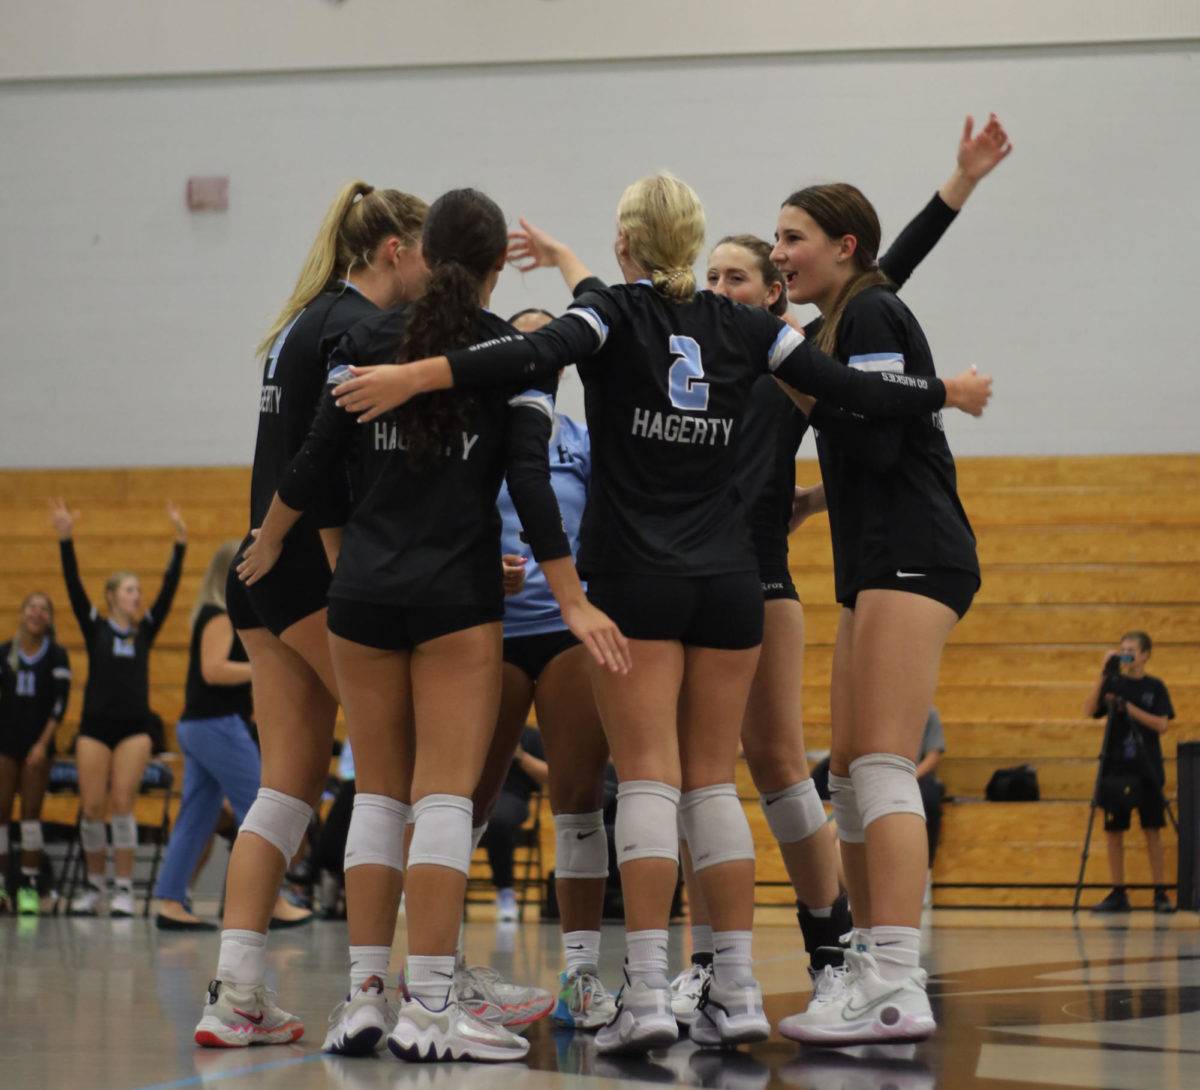 The+girls+varsity+volleyball+team+celebrates+after+a+kill+against+Lyman+on+Aug.+23.+Hagerty+won+3-0%2C+starting+a+winning+streak+for+the+upcoming+season.